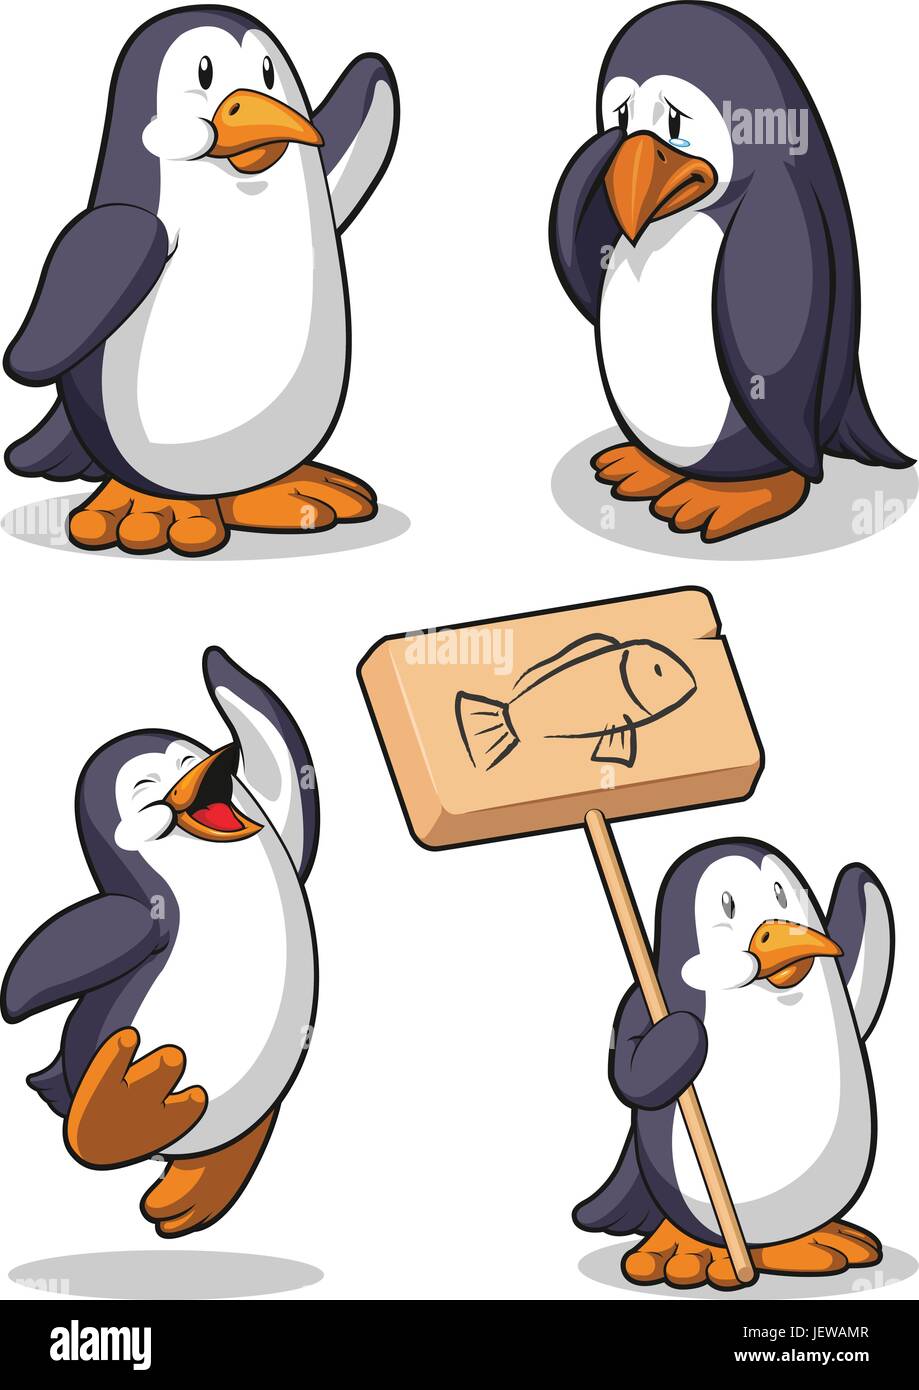 animal, bird, penguin, delighted, unambitious, enthusiastic, merry, radiant Stock Vector